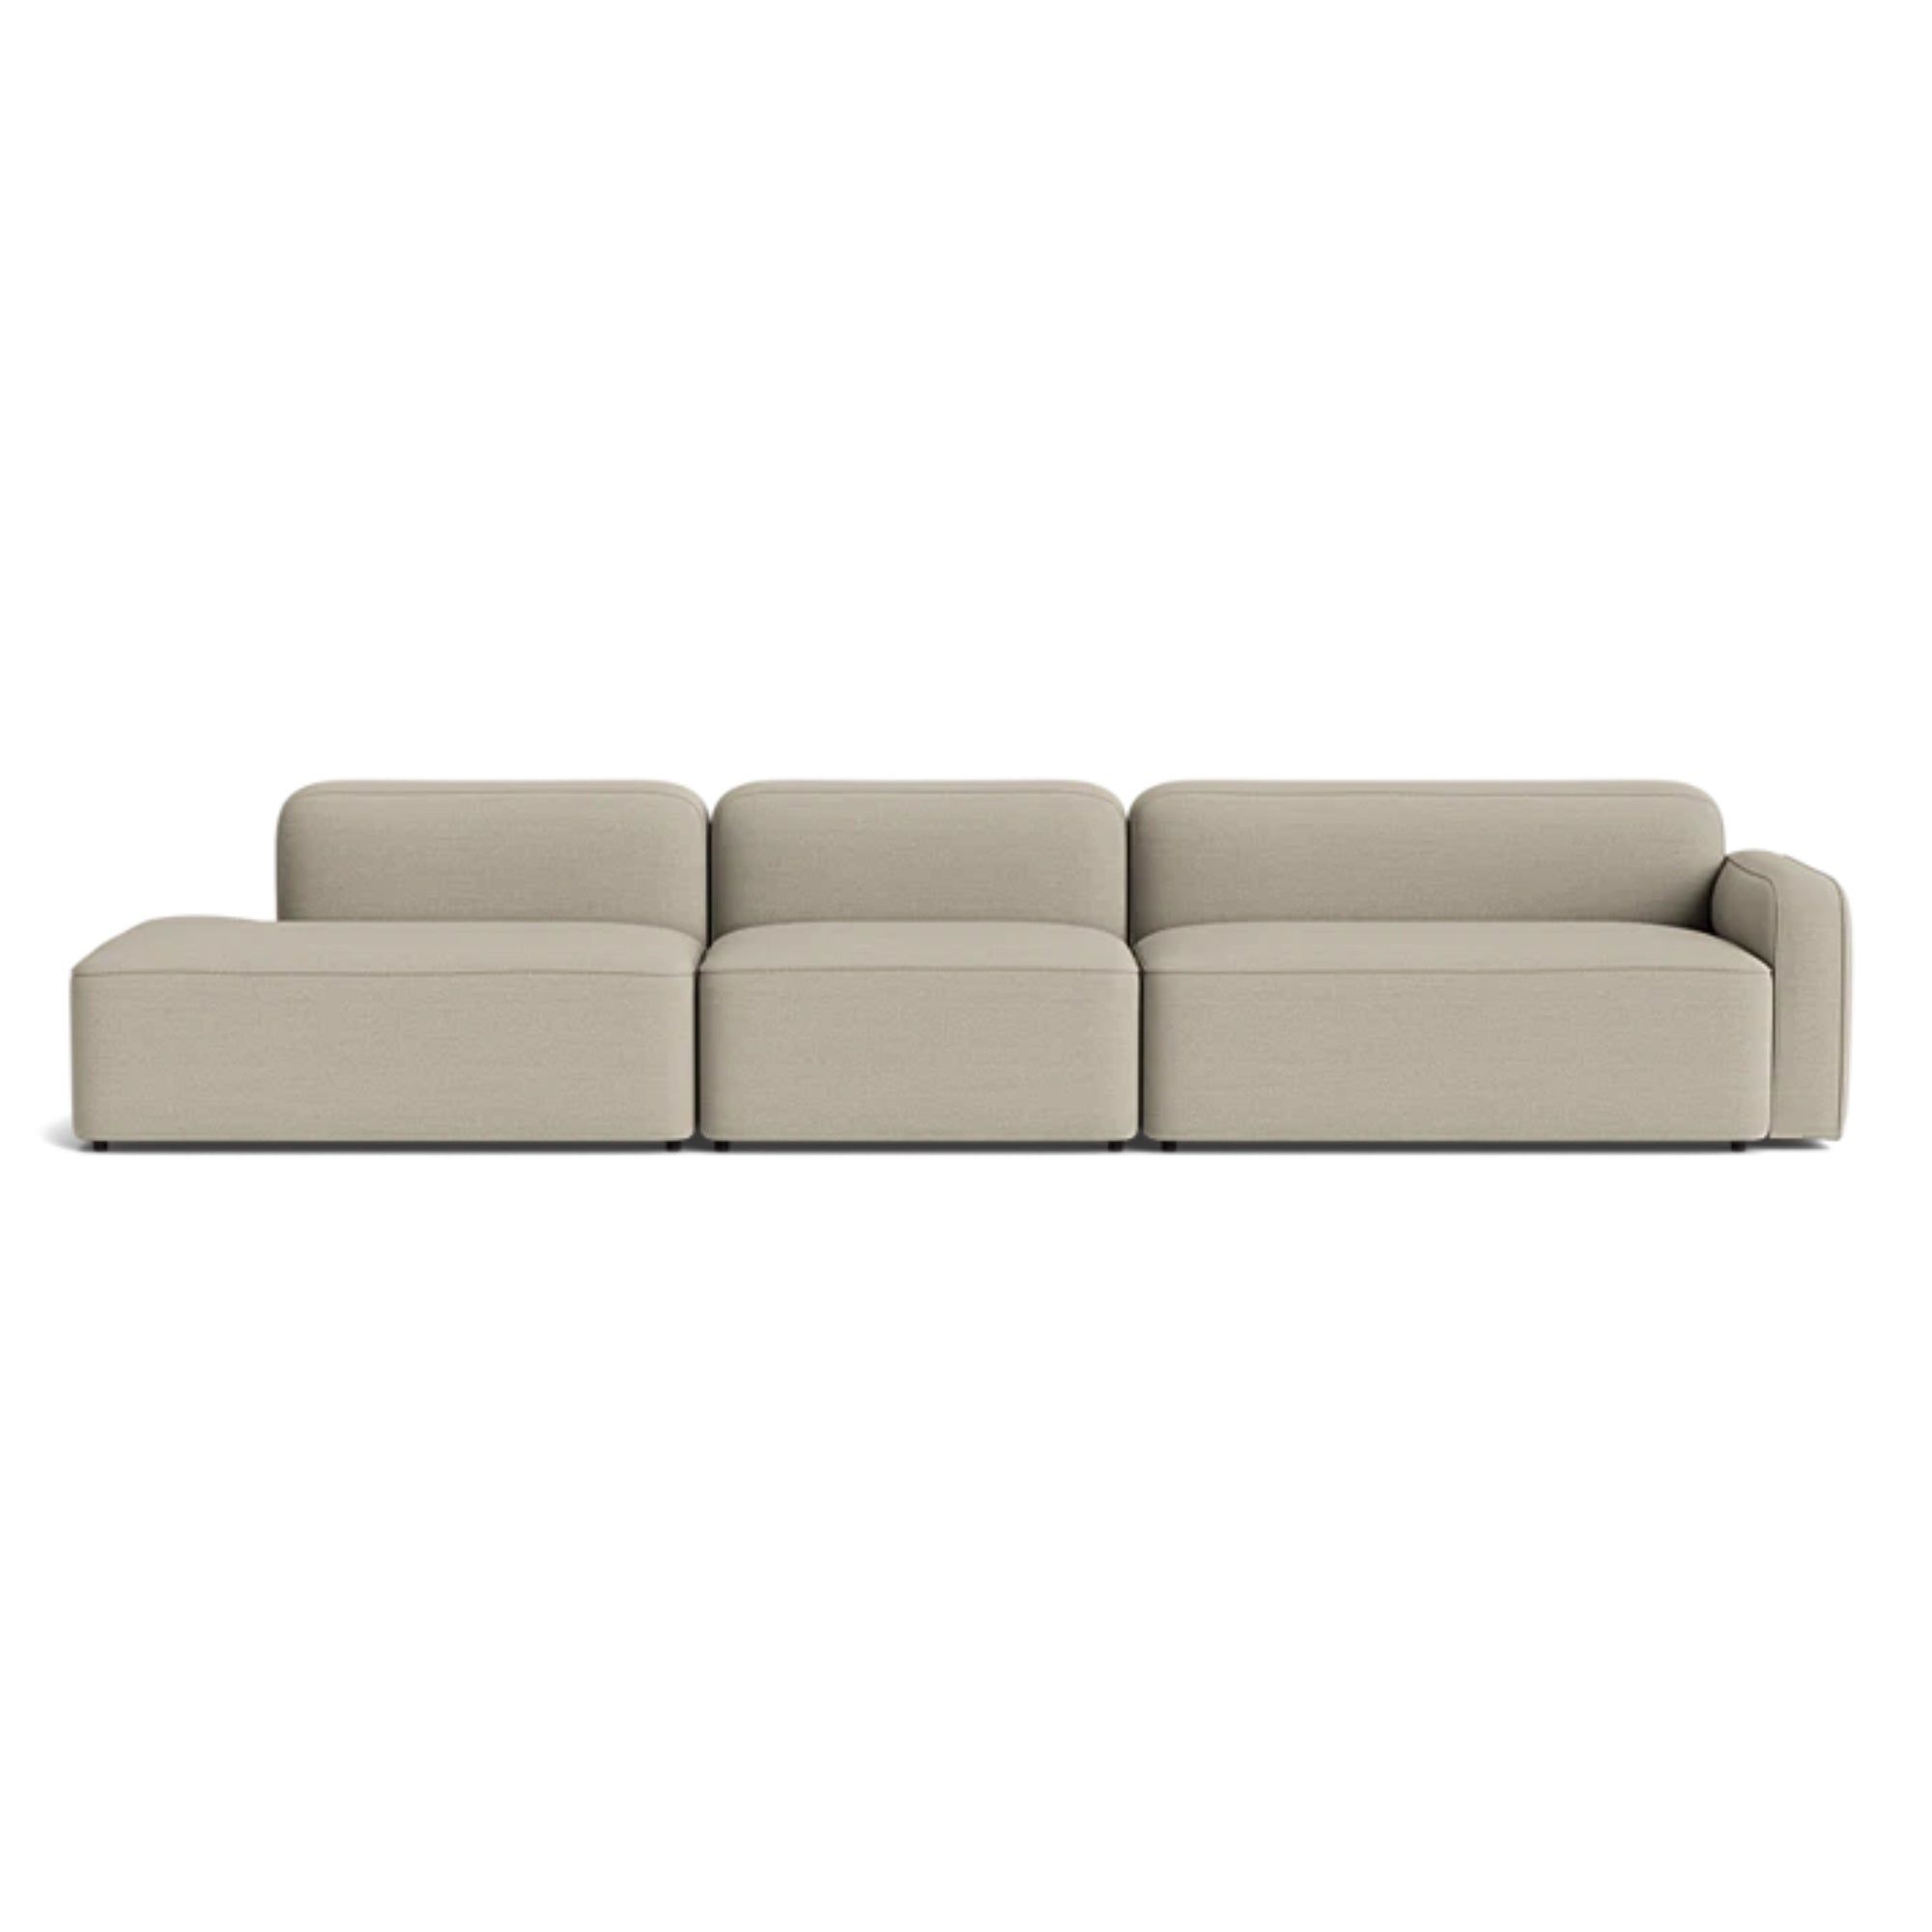 3 Seaters Sofas Stylish and Comfortable Couches for Three People